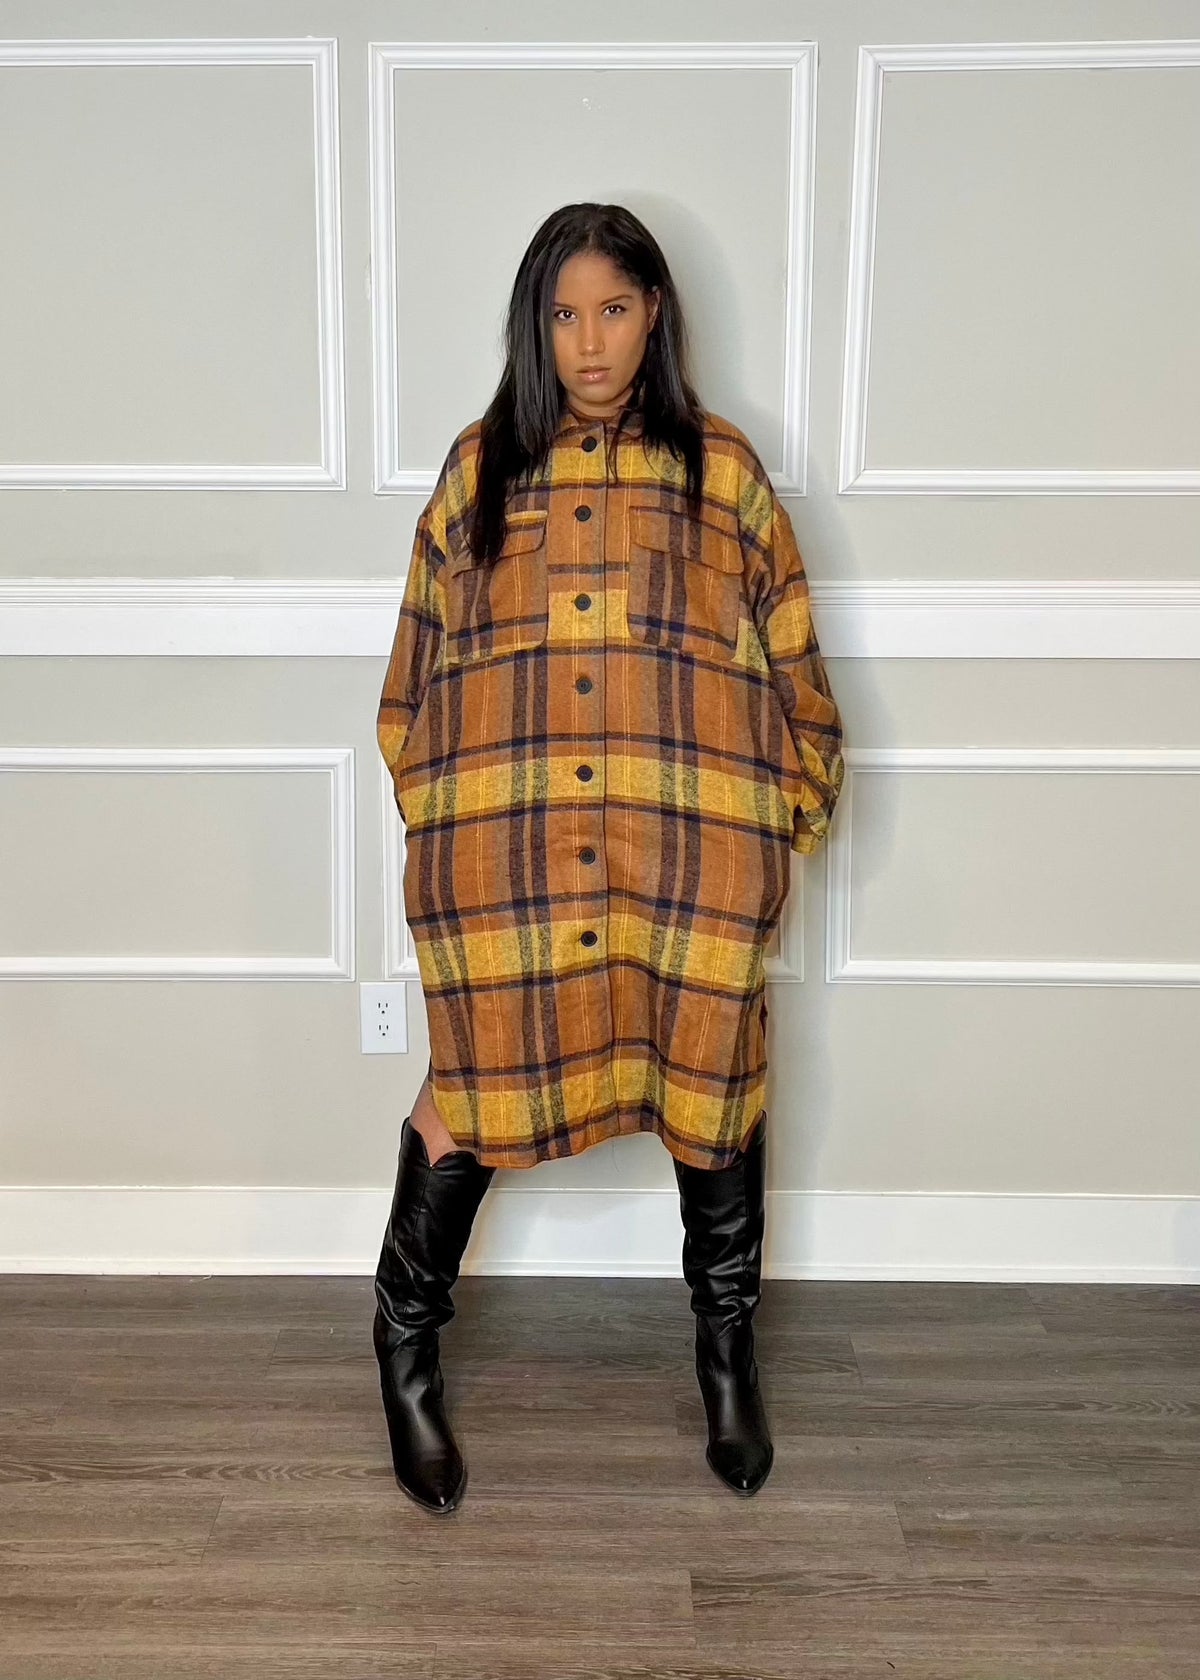 Get trendy with Plaid Flannel Long Overcoat - Jacket available at ELLE TENAJ. Grab yours for $59.0 today!